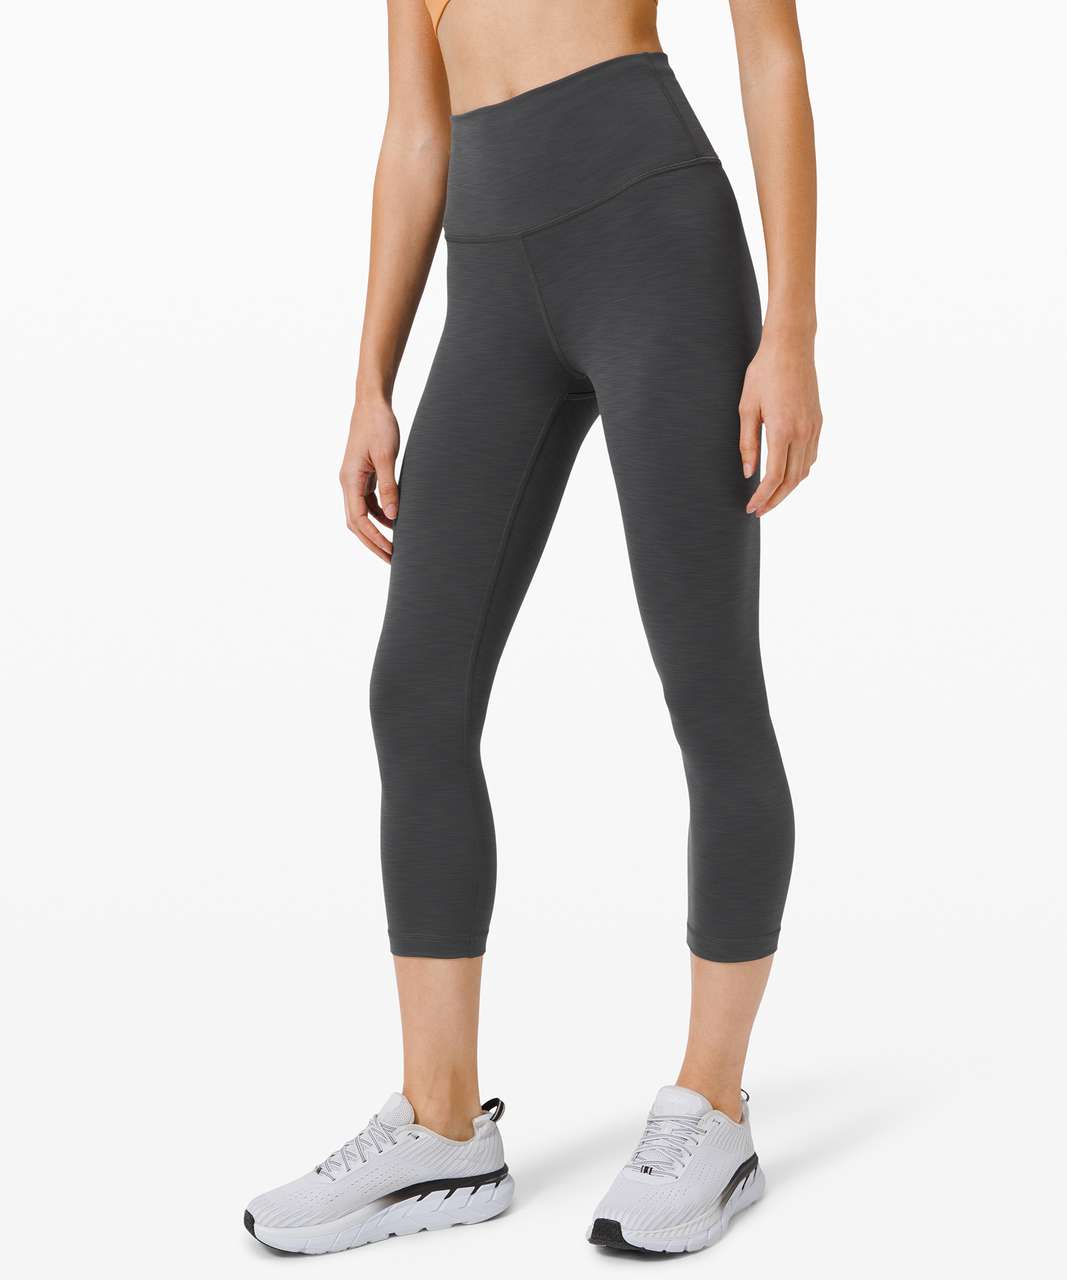 Wunder train long sleeve special edition size 6 paired with wunder train  25” heathered graphite grey size 4 : r/lululemon